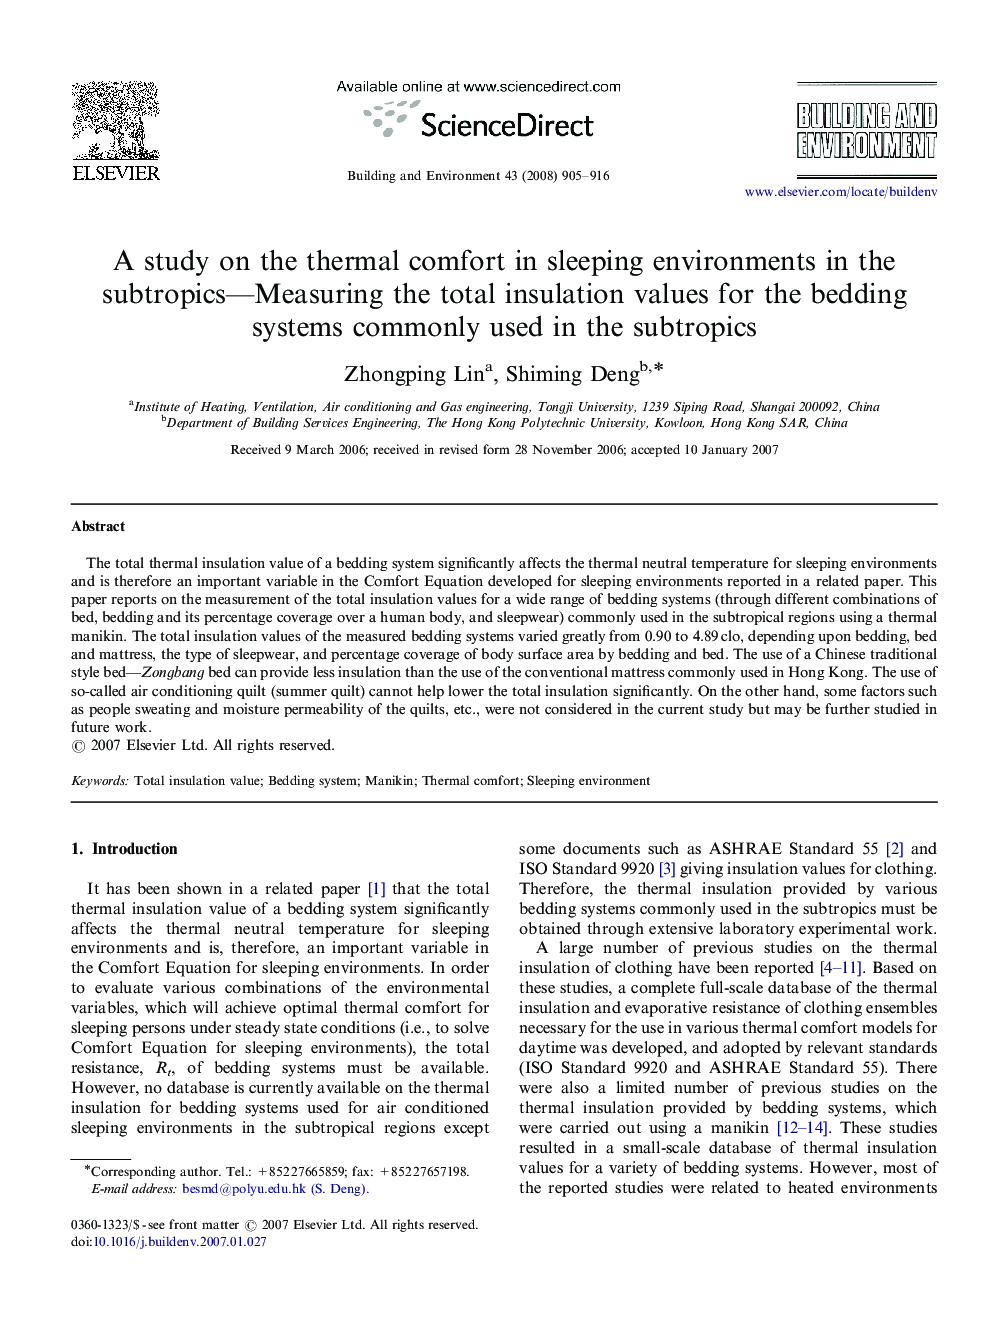 A study on the thermal comfort in sleeping environments in the subtropics—Measuring the total insulation values for the bedding systems commonly used in the subtropics